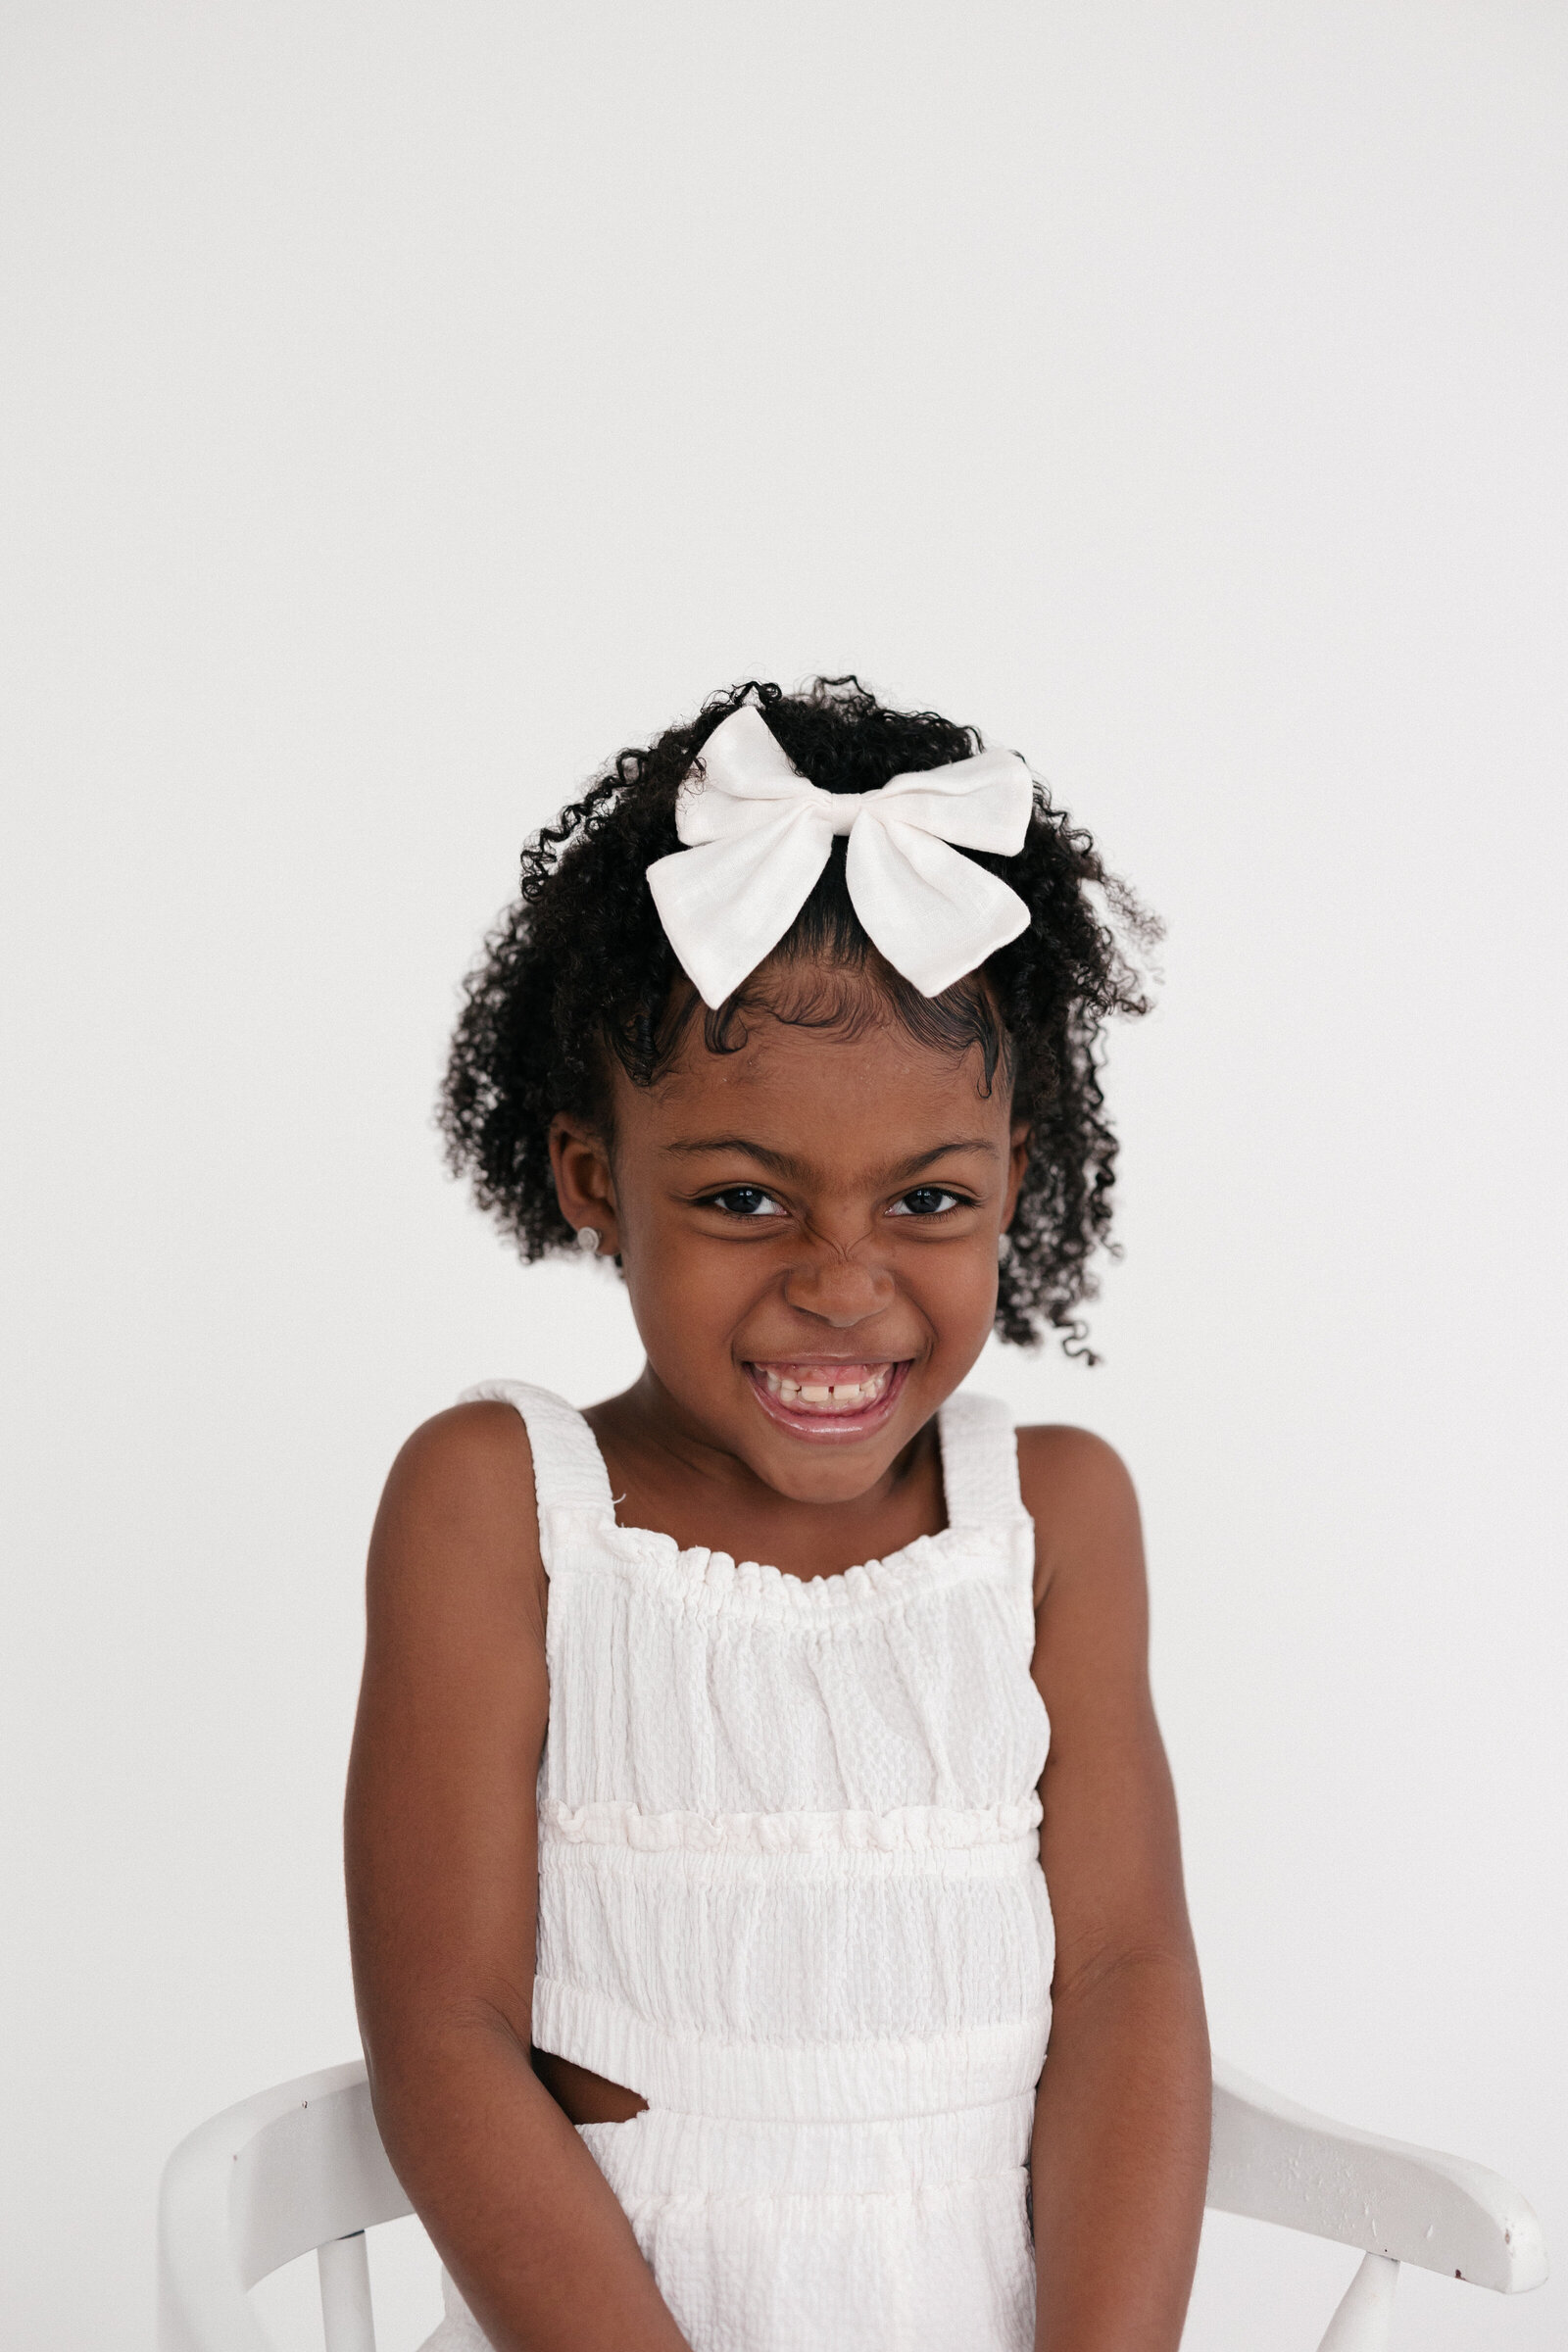 Little girl wearing a white outfit as she smiles big